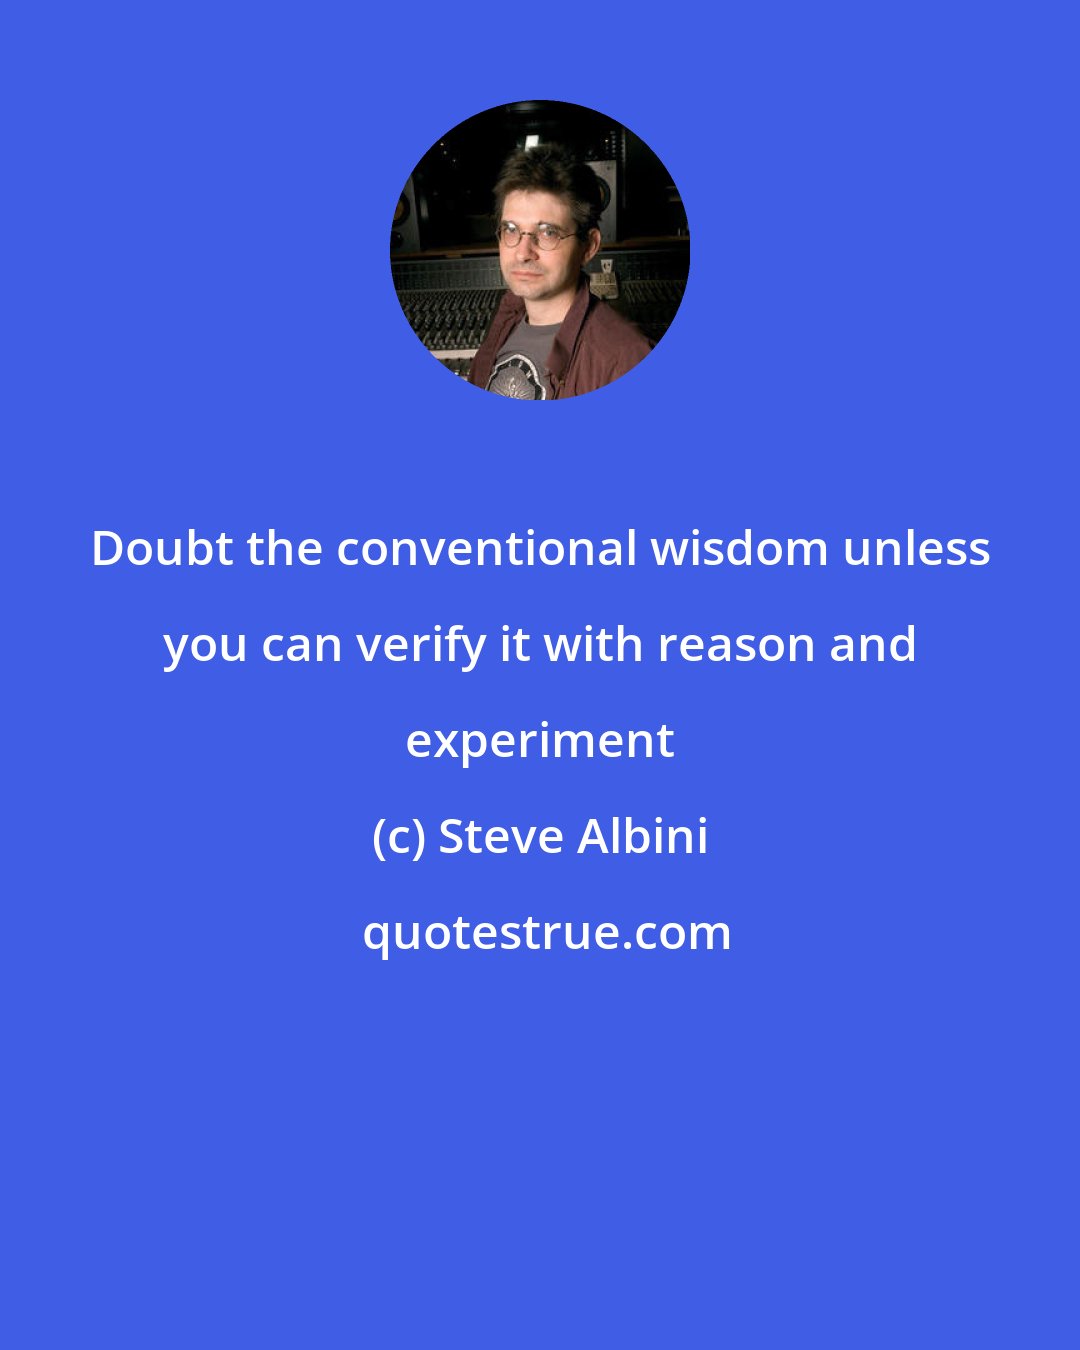 Steve Albini: Doubt the conventional wisdom unless you can verify it with reason and experiment